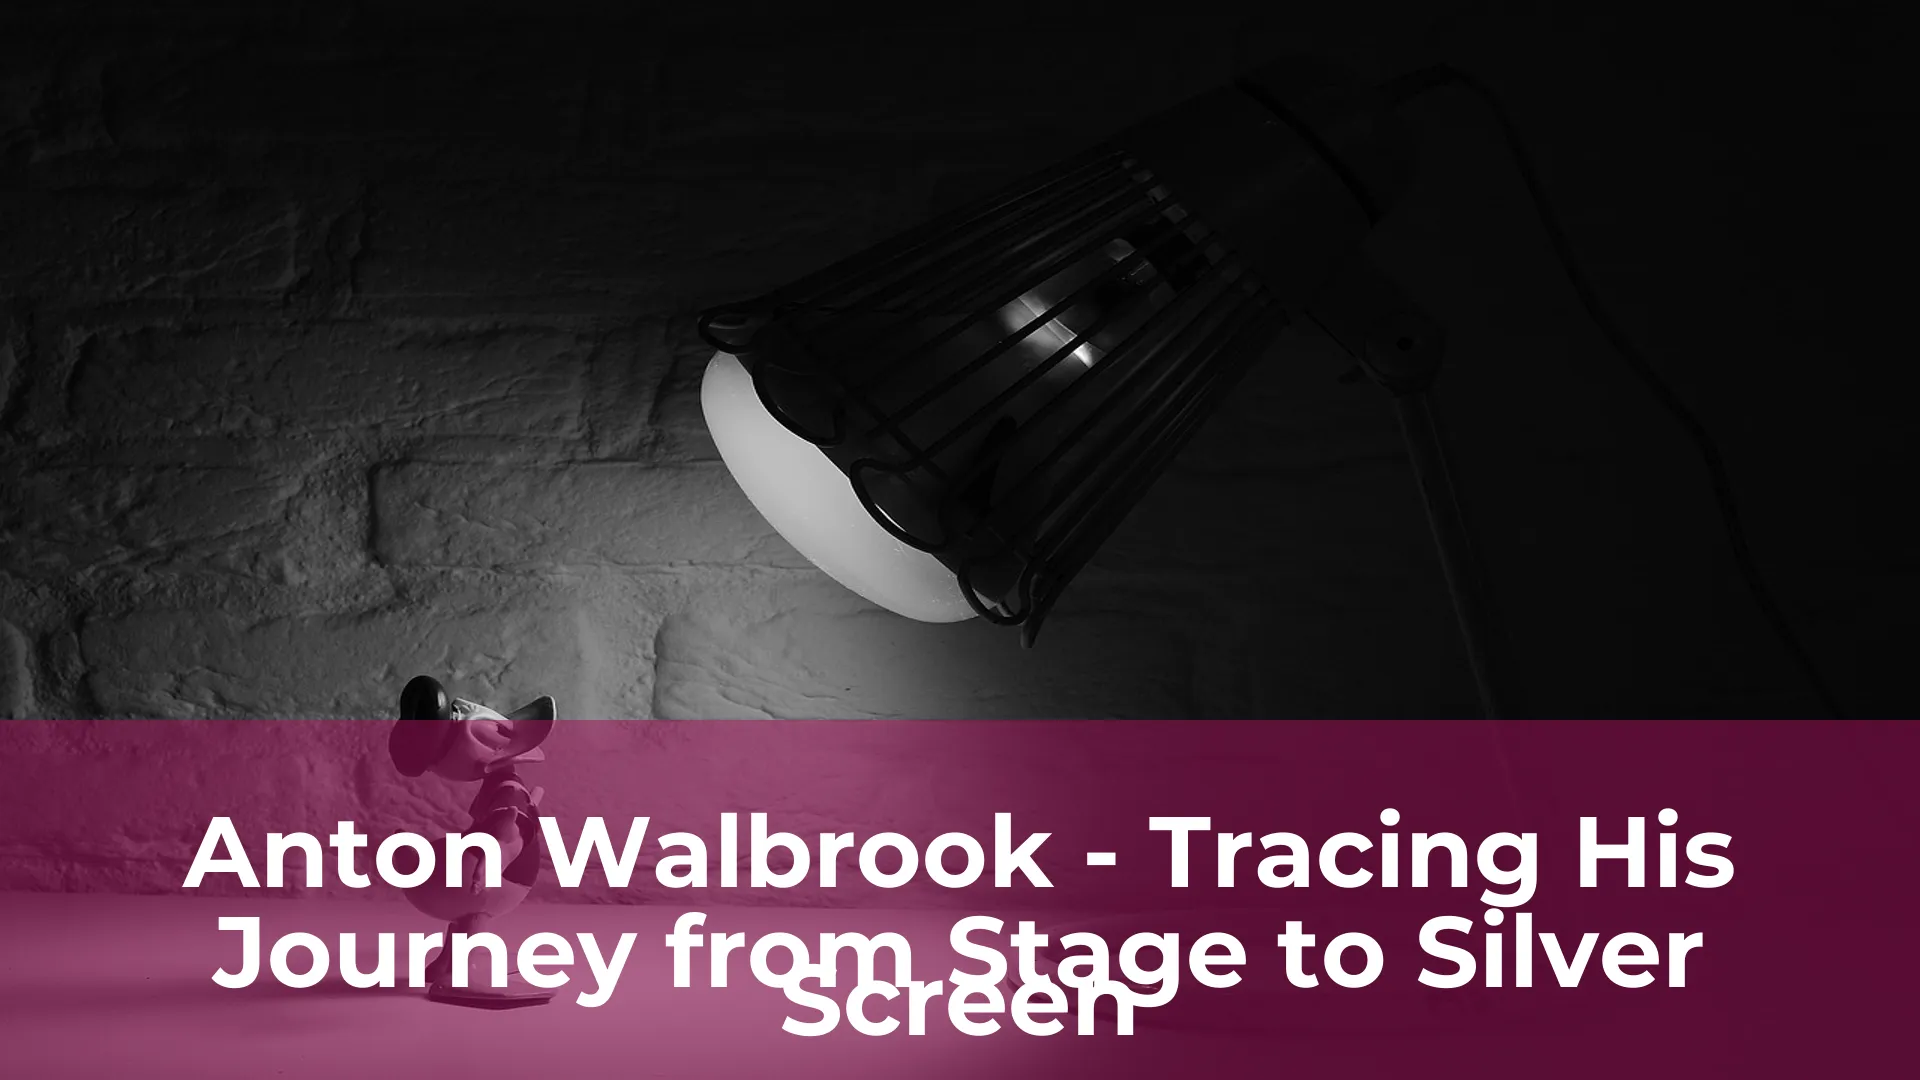 Anton walbrook tracing his journey from stage to silver screen